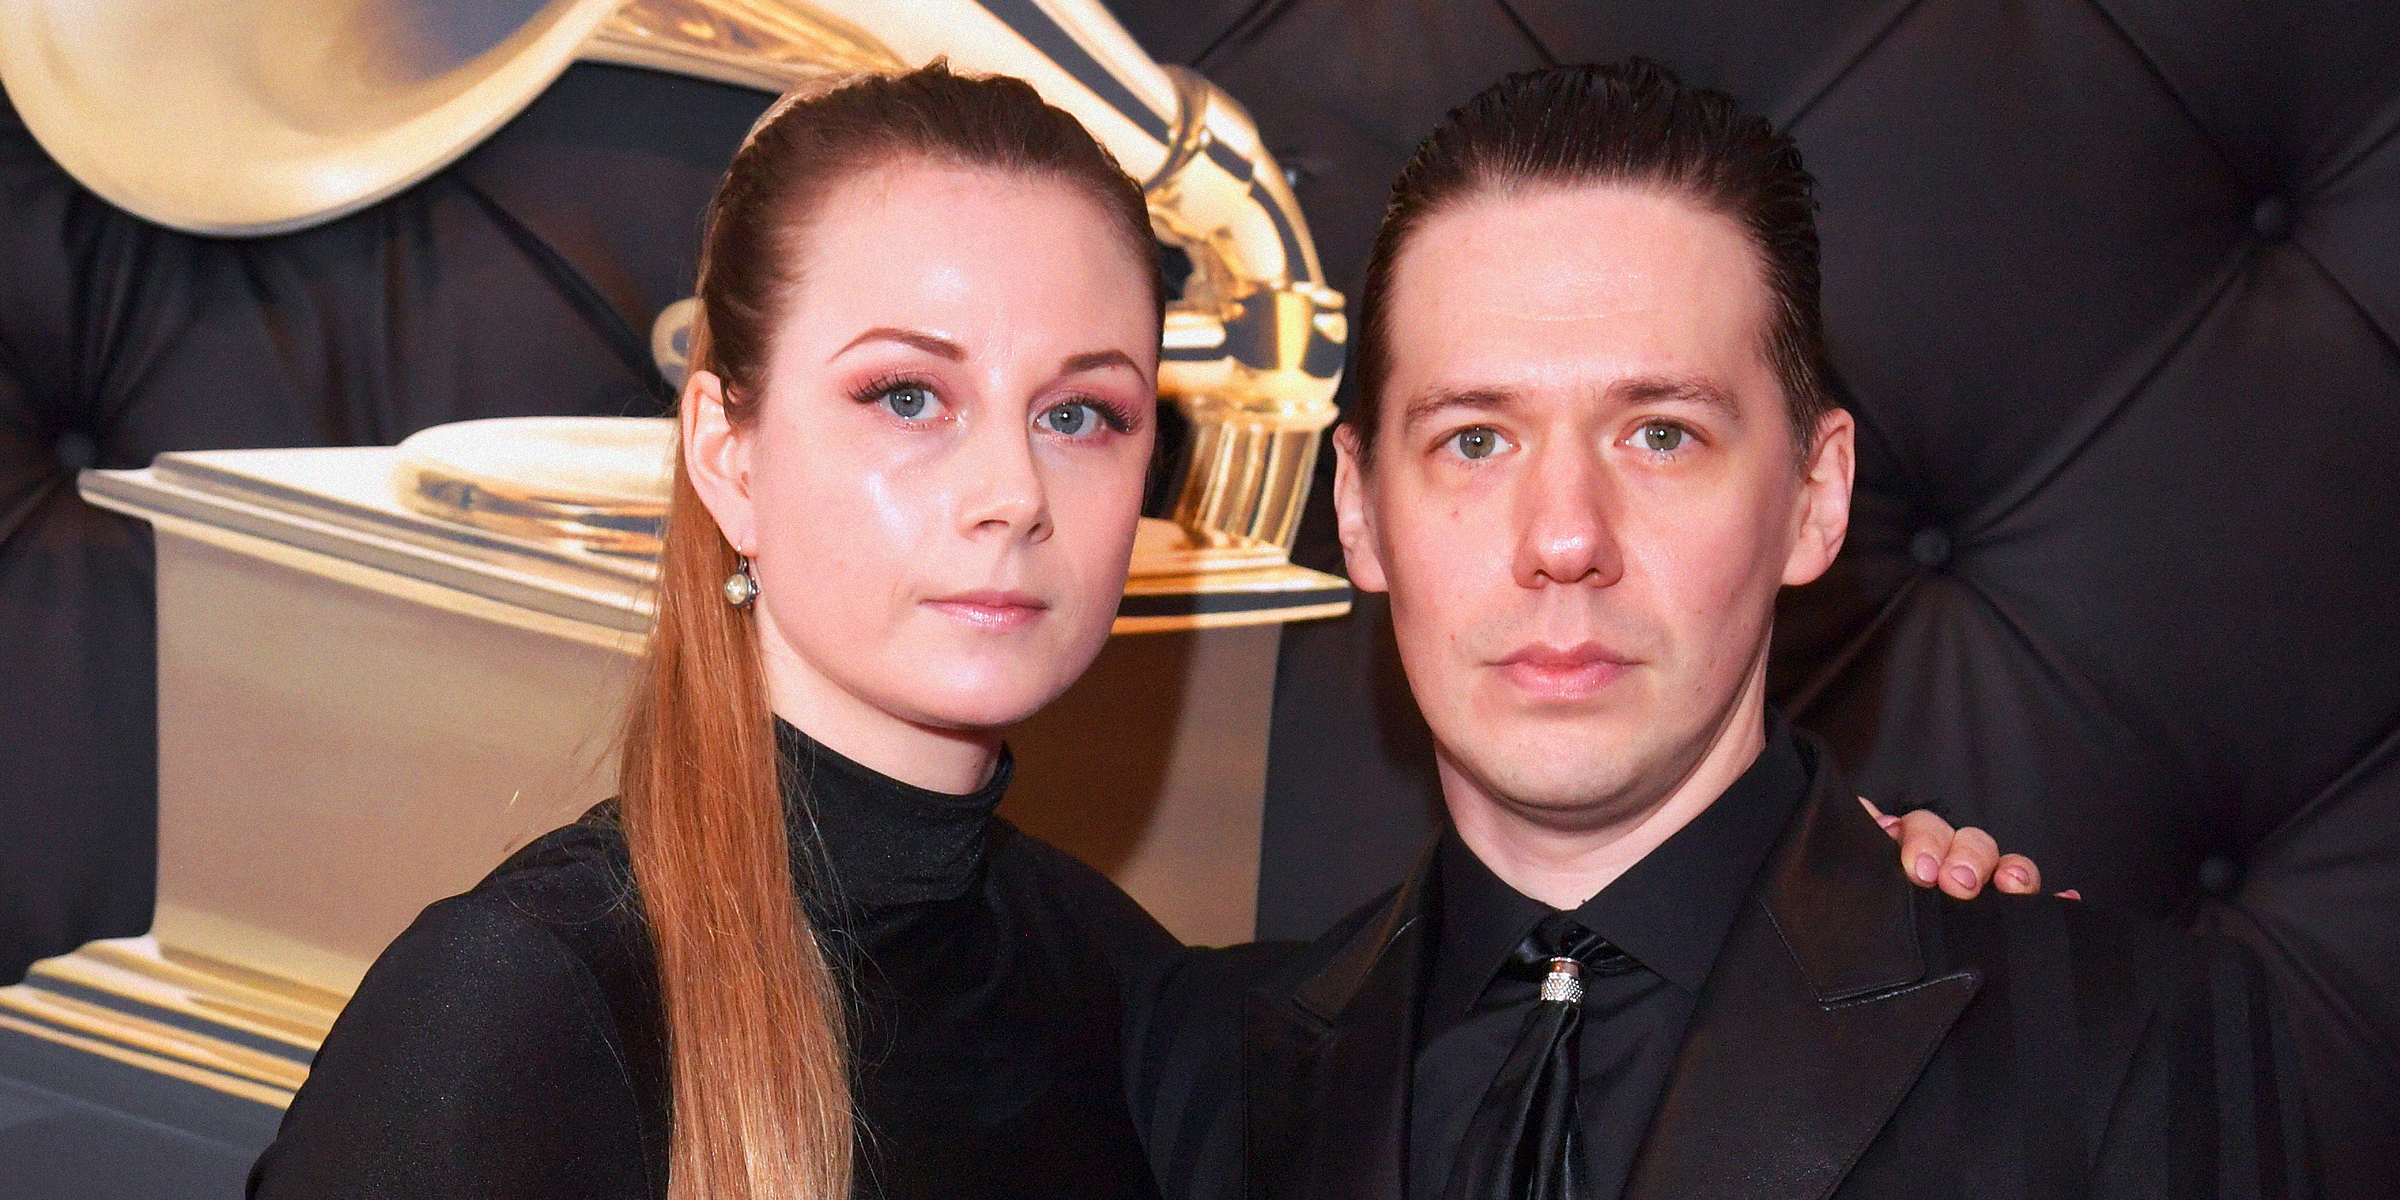 Boel Forge and Tobias Forge | Source: Getty Images